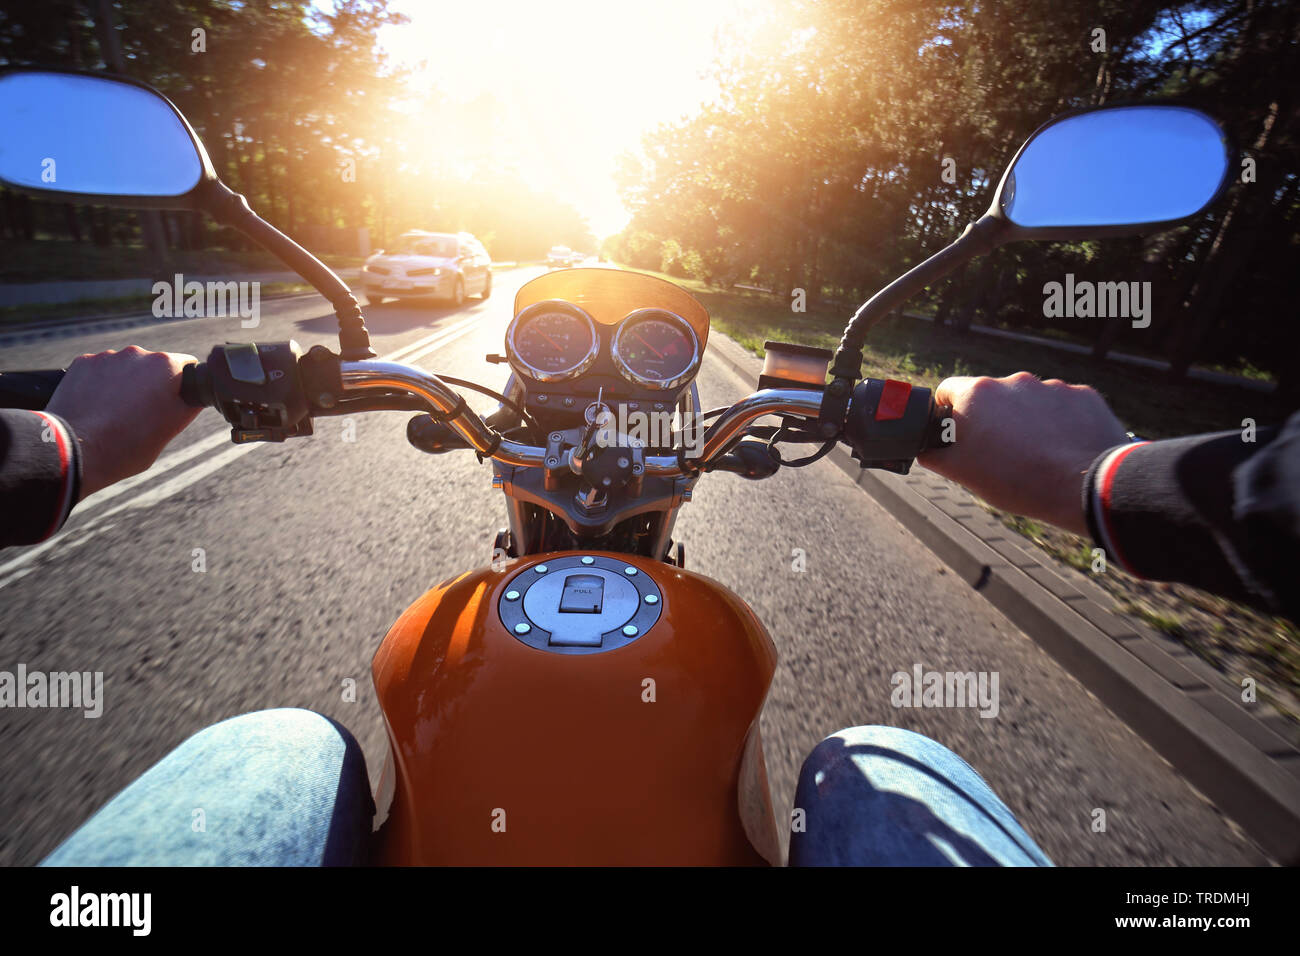 Motorcyclist drives motorbike on a sunny day on the street Stock Photo